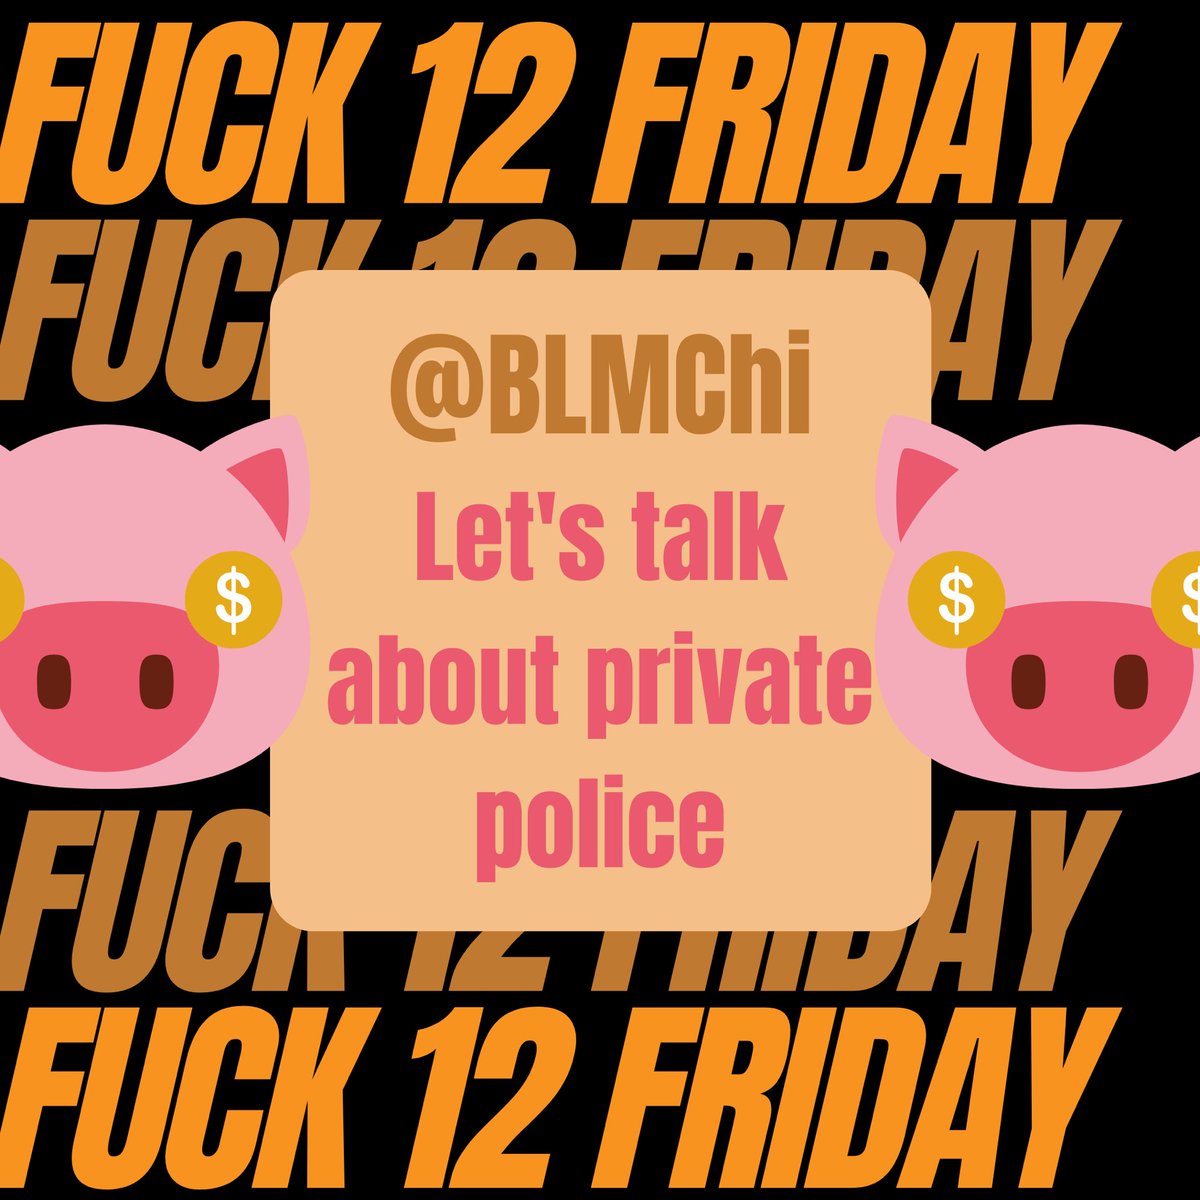 That includes UCPD & NUPD, here’s our graphic rendering of  @BLMChi  #Fuck12Friday on private police 3a/